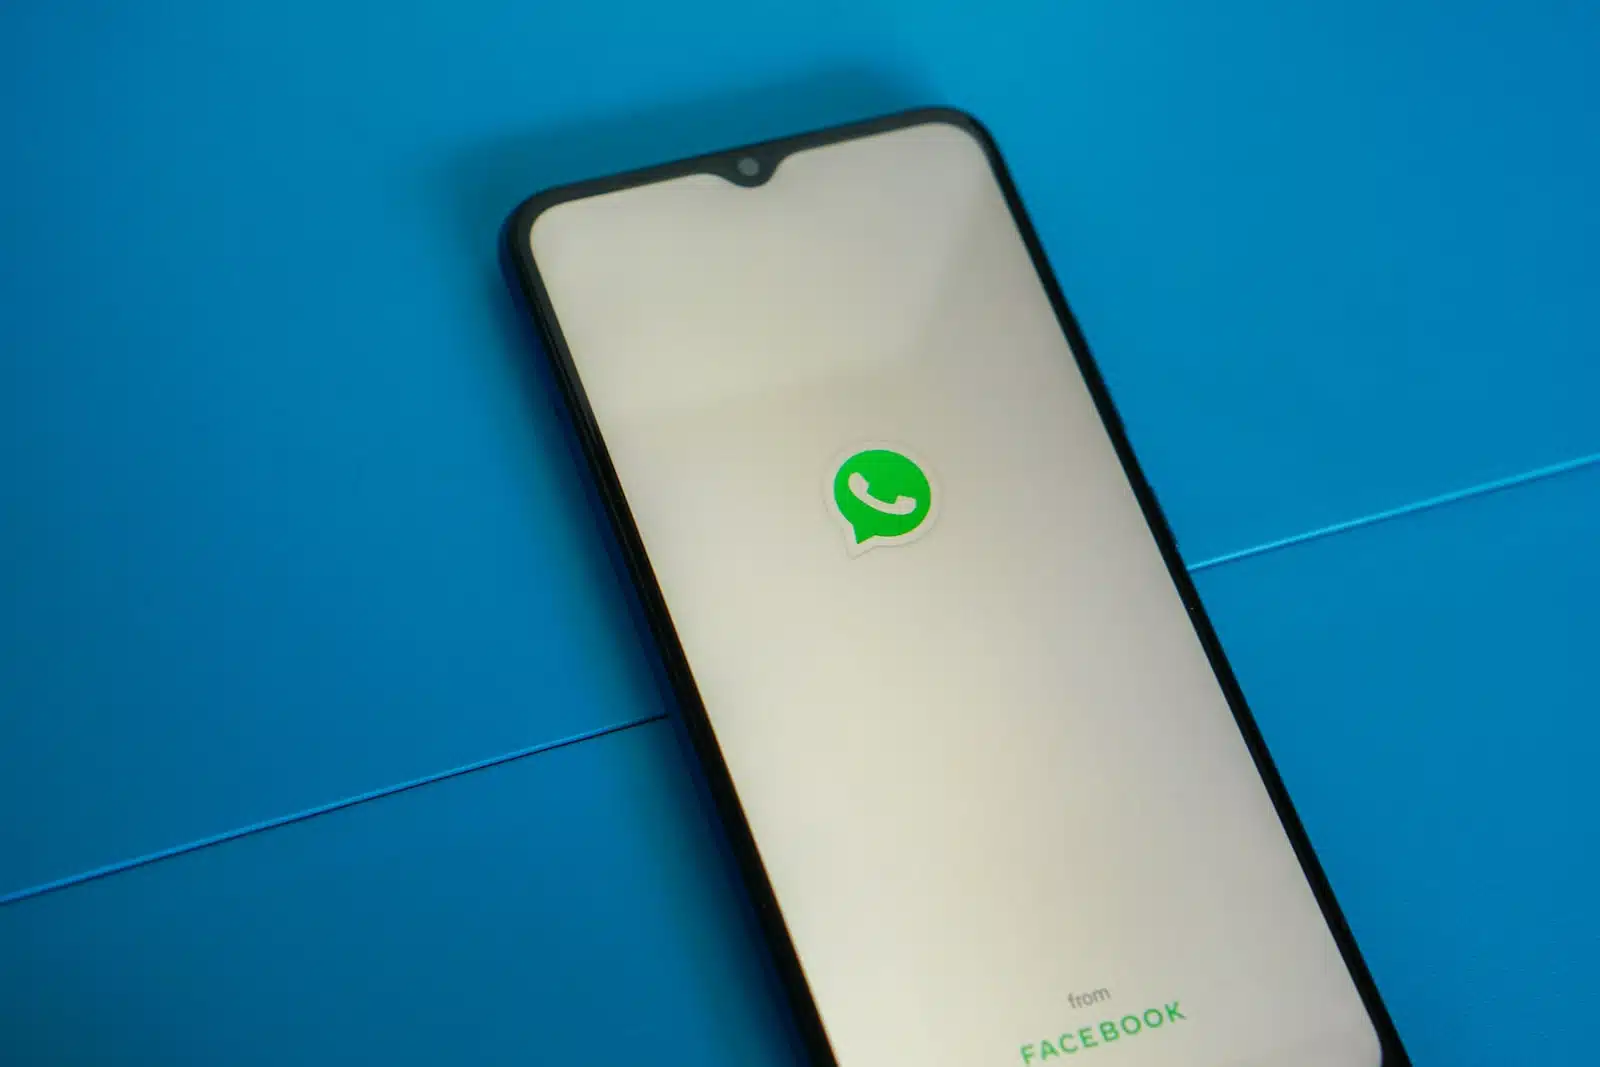 Update WhatsApp's new feature allows iOS and Android users to easily share HD Images.